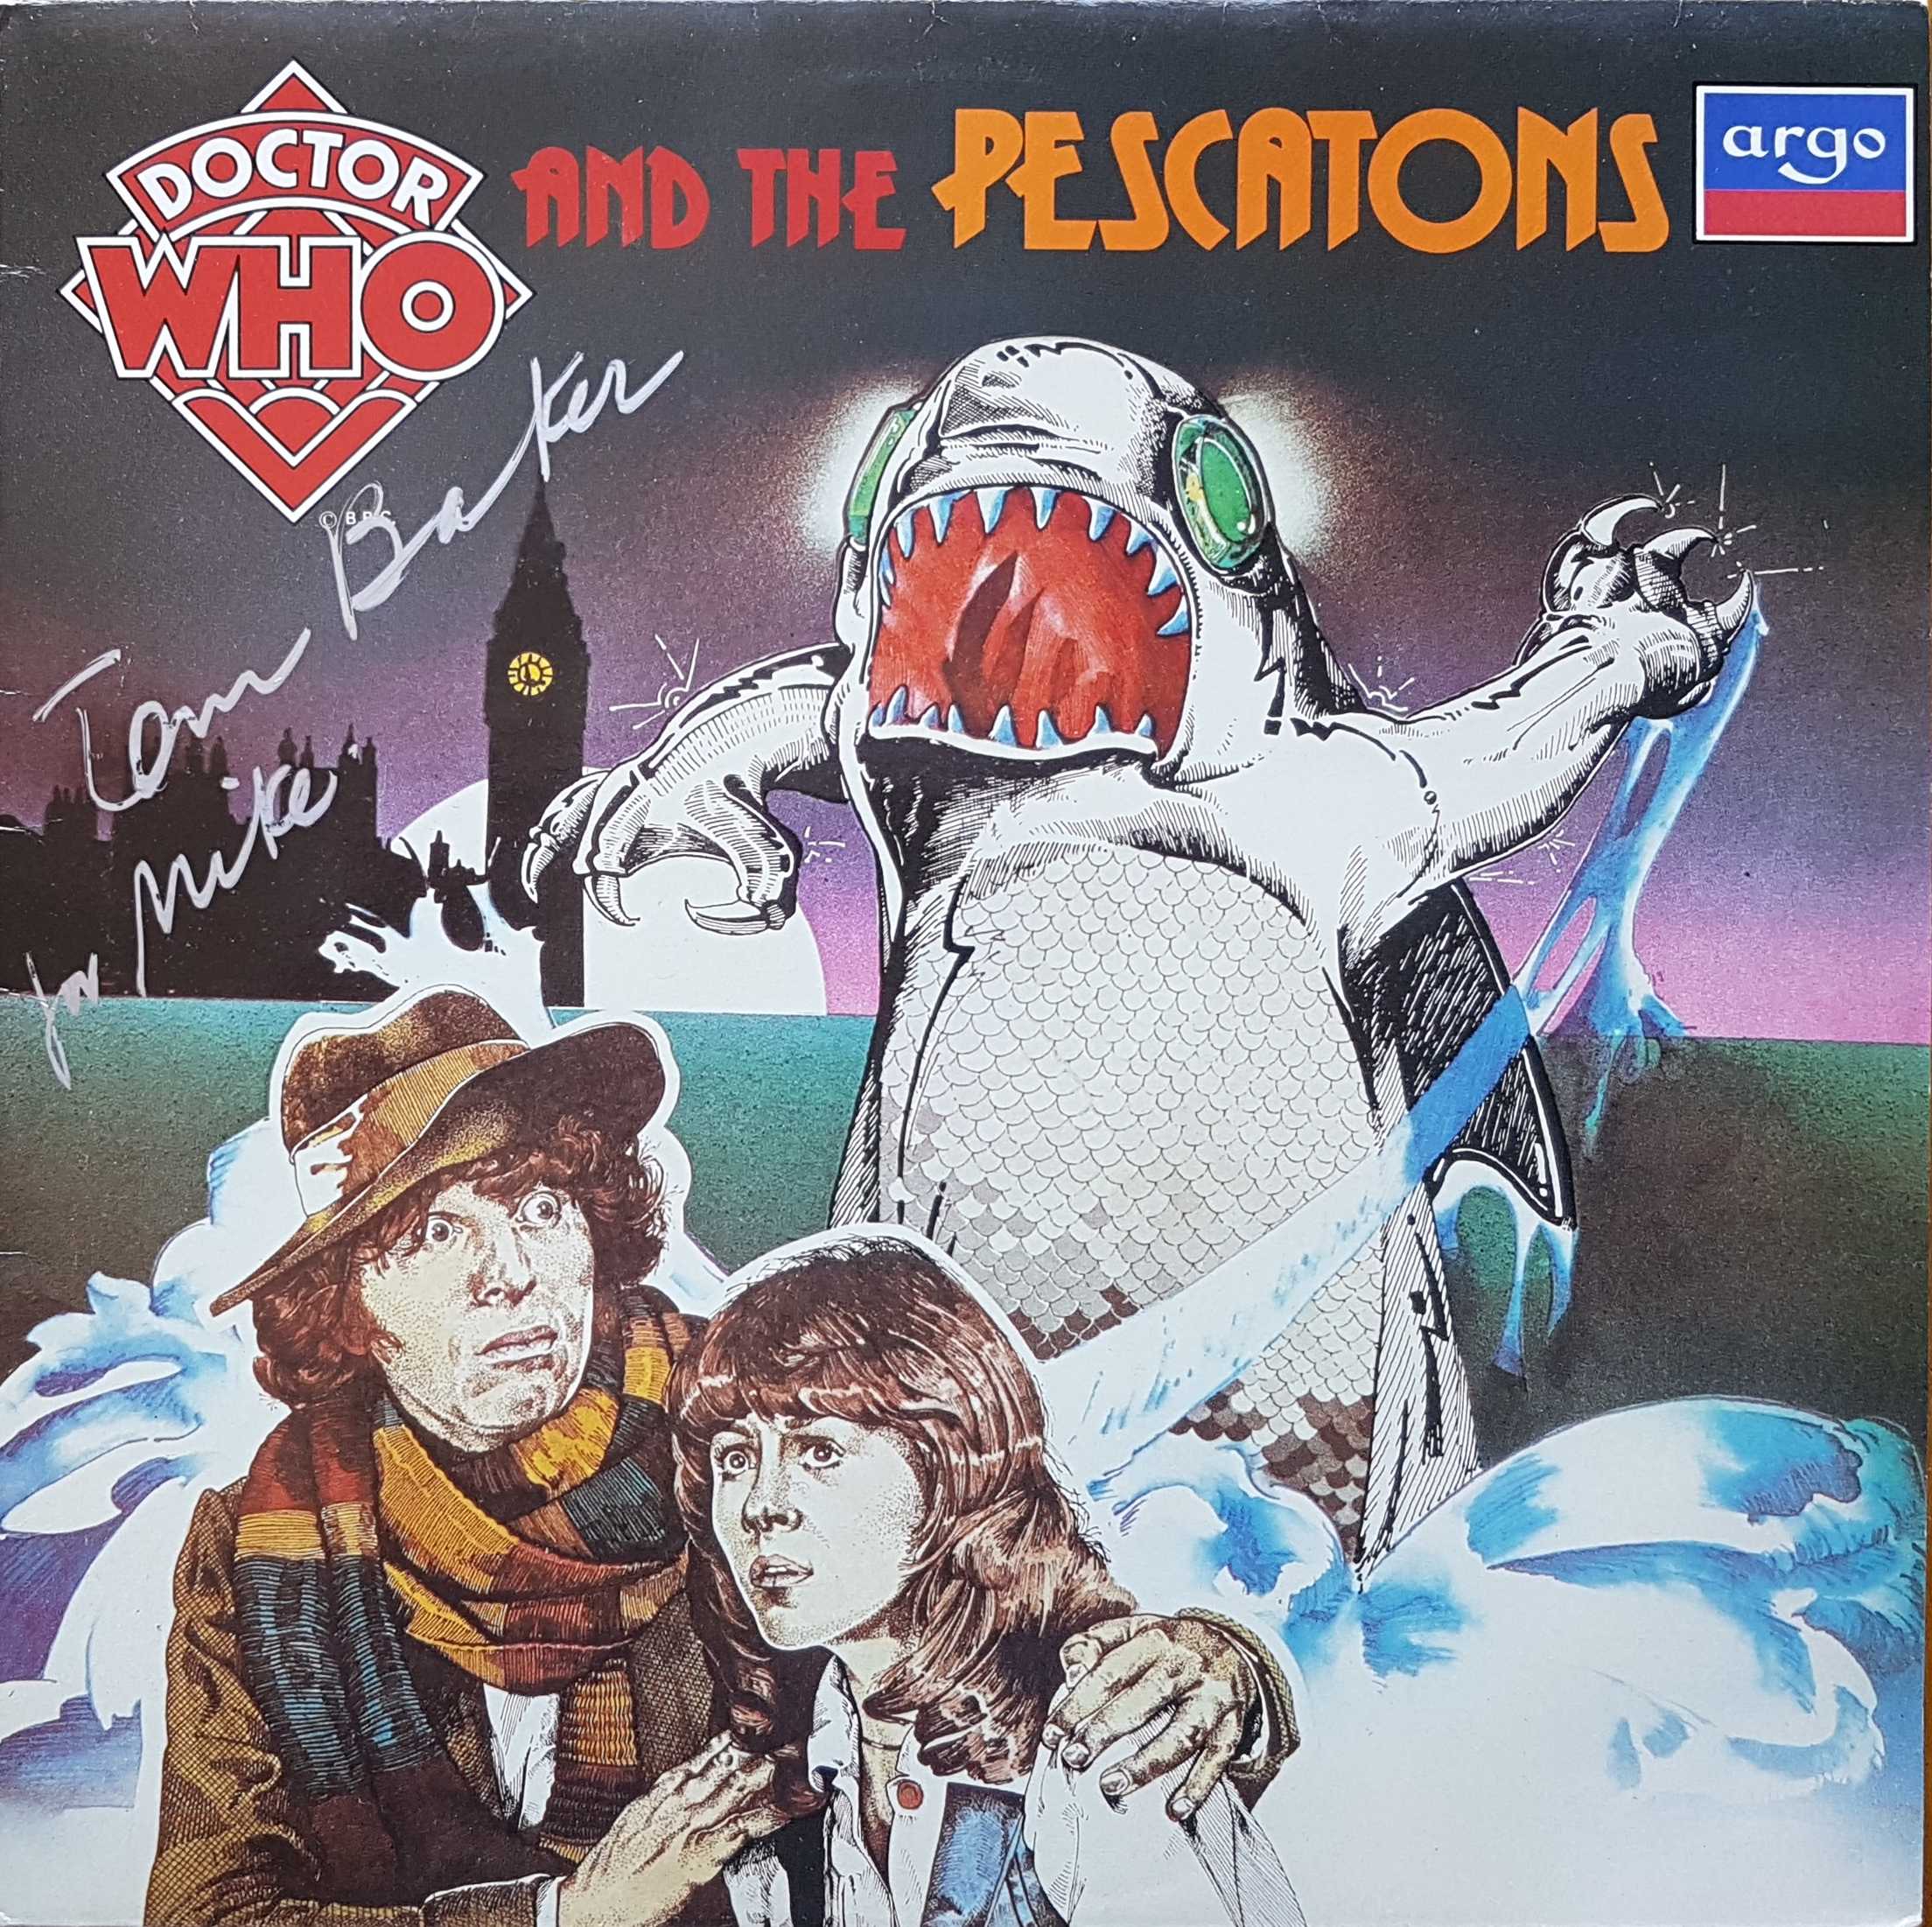 Picture of 414459 1 Doctor who and the Prescatons - Autographed by artist Victor Pembleton from the BBC albums - Records and Tapes library